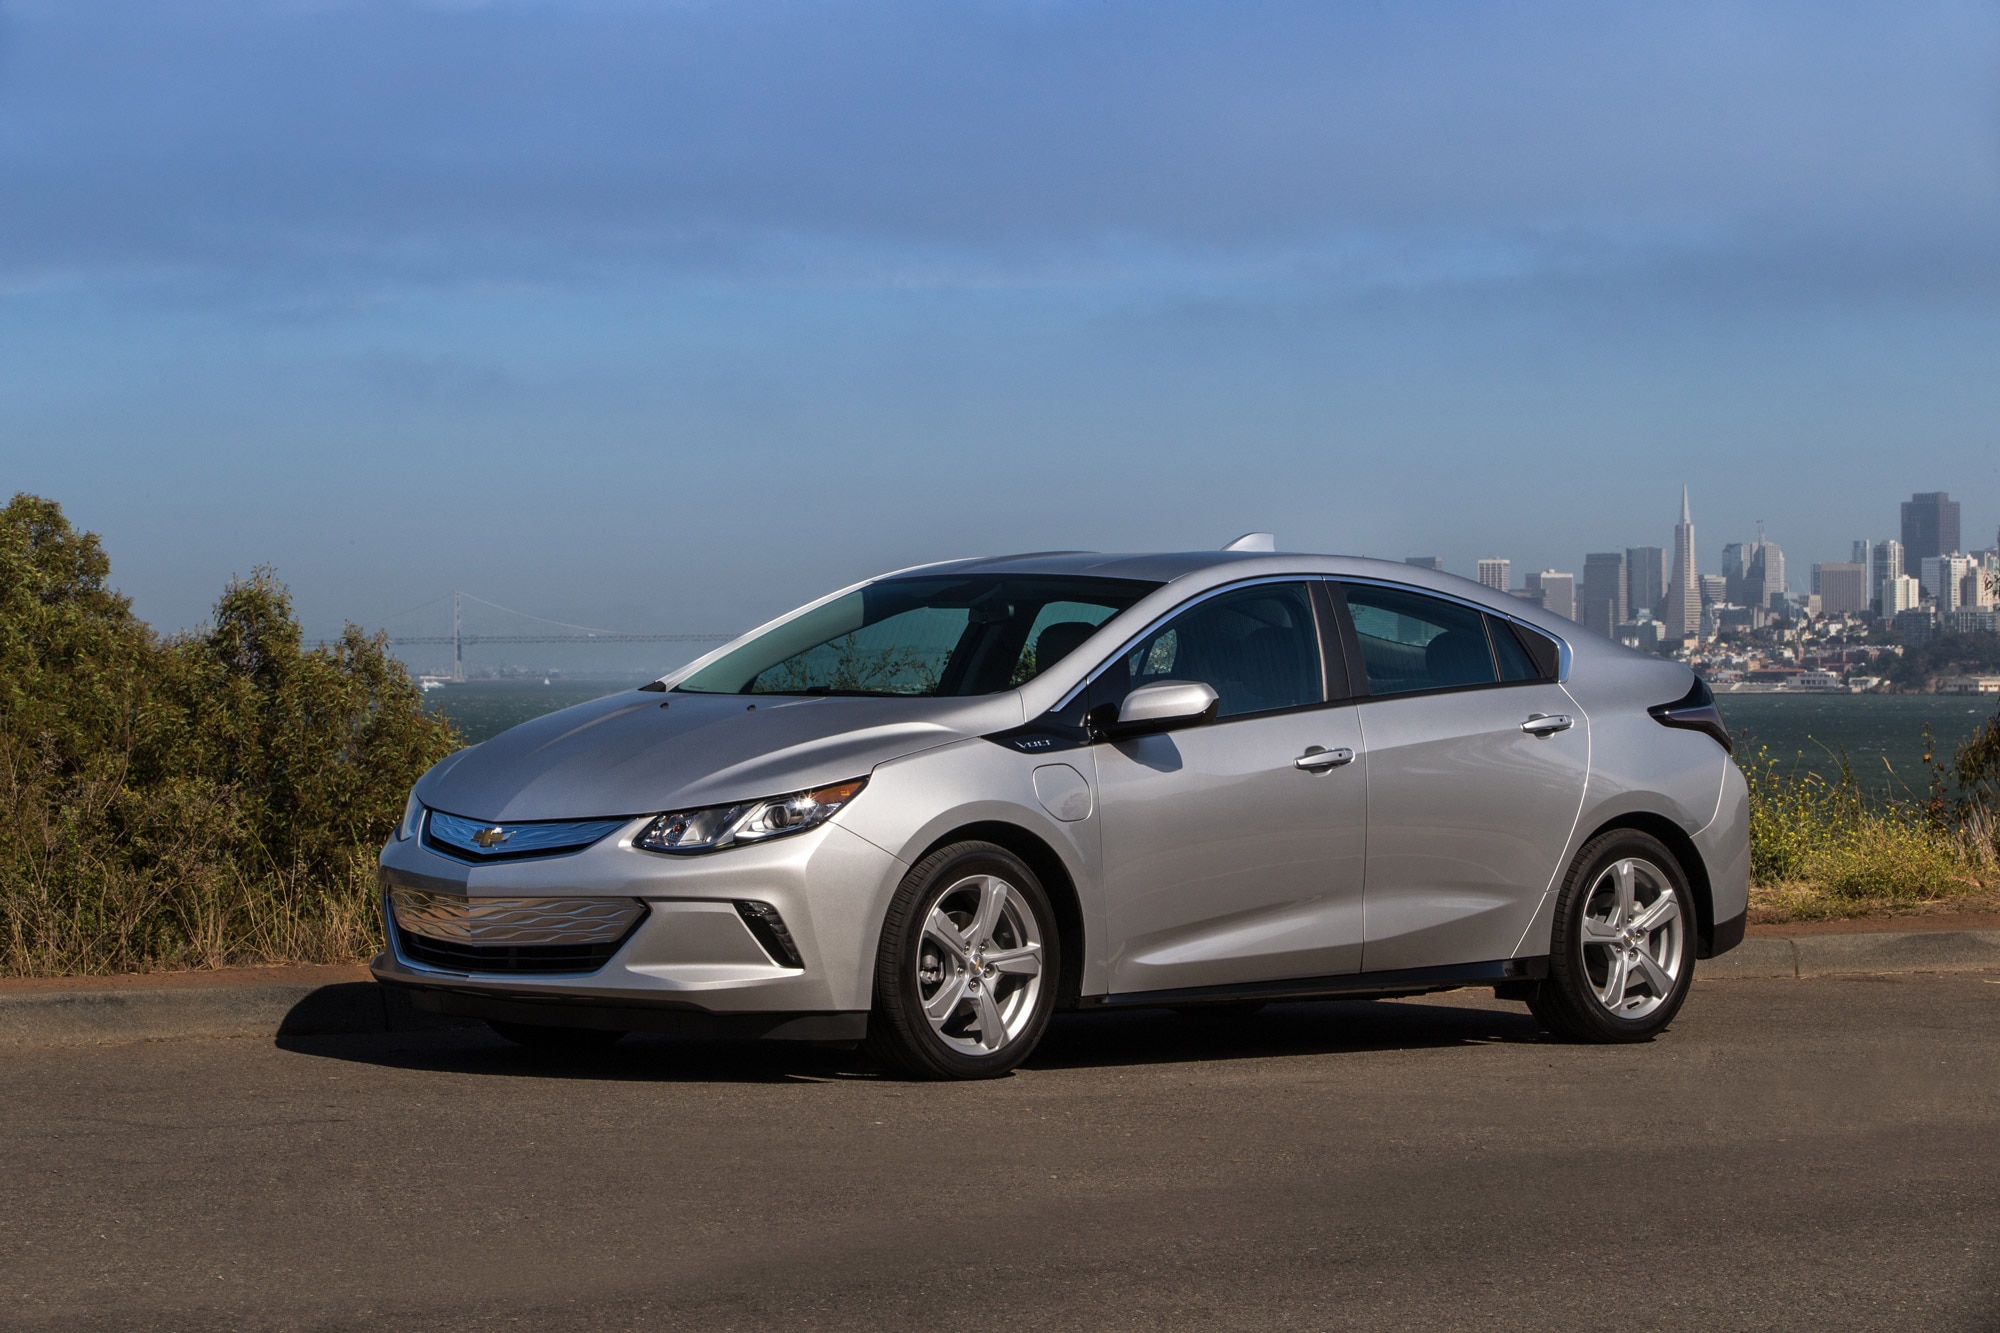 Side view of a silver 2018 Chevrolet Volt with San Francisco in the background.